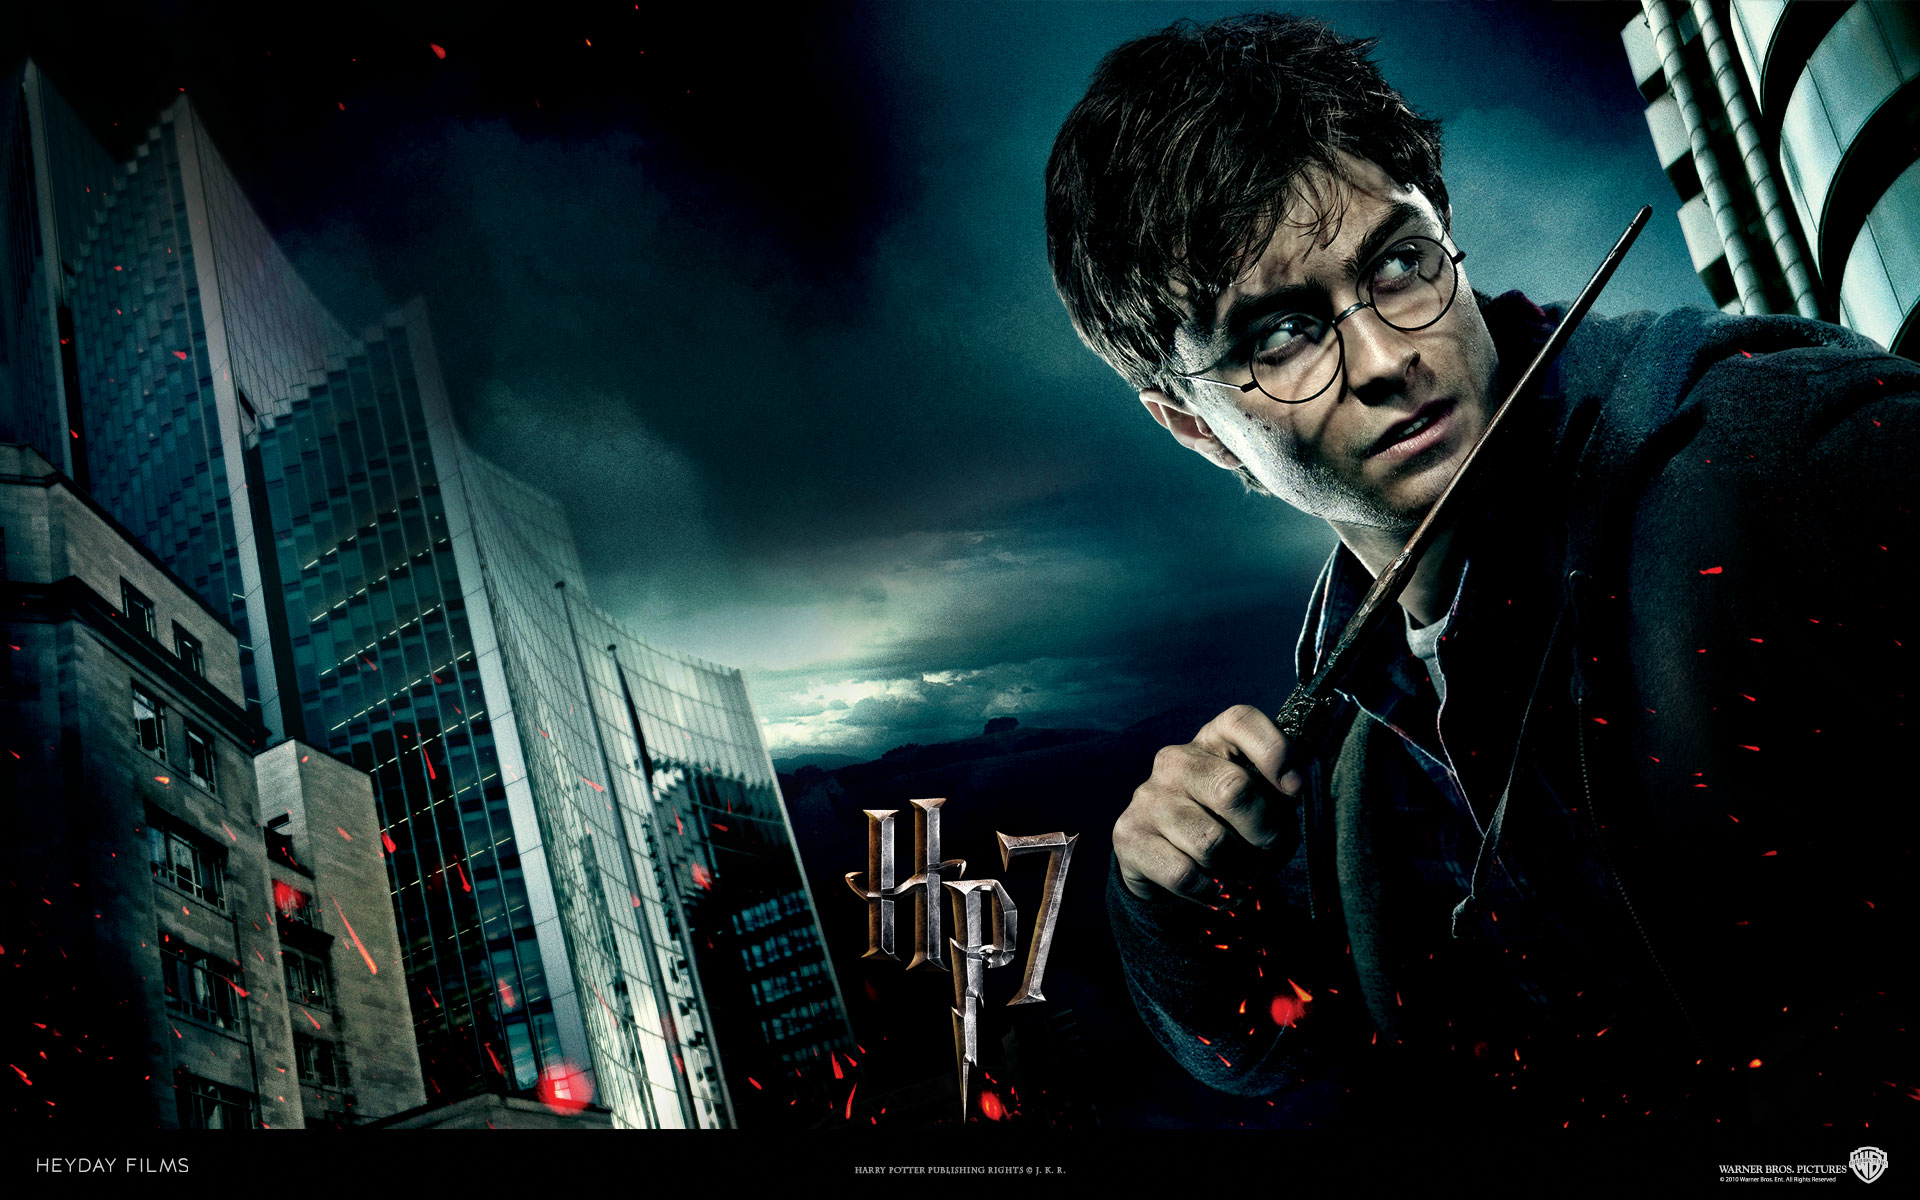 Harry Potter and the Deathly Hallows Wallpapers HD Wallpapers 1920x1200